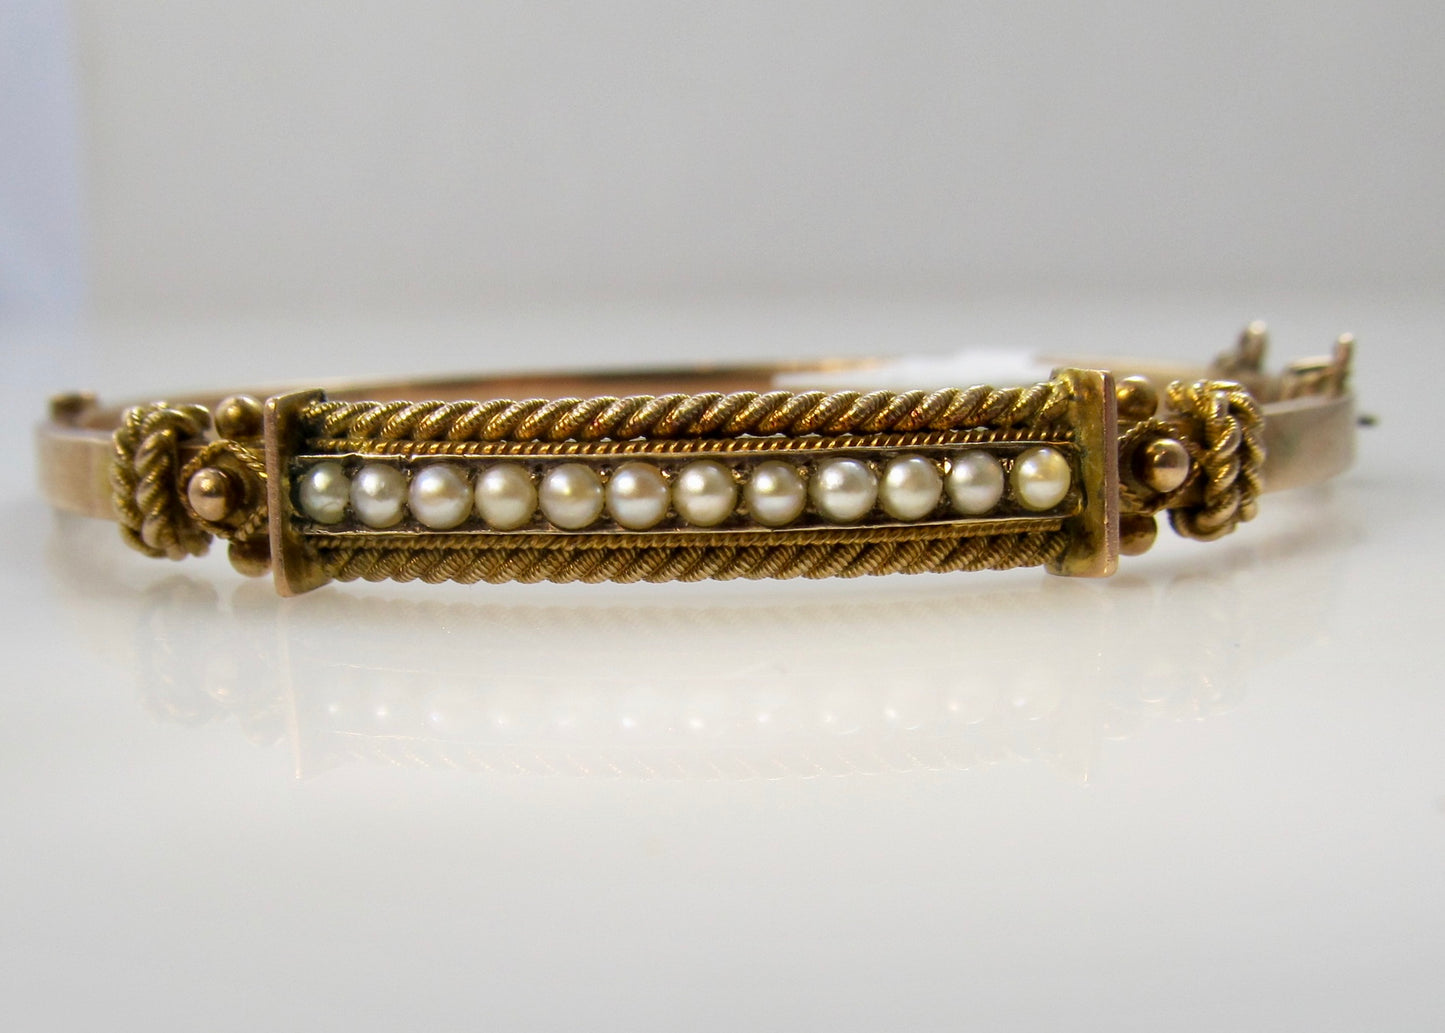 Antique bangle with pearls